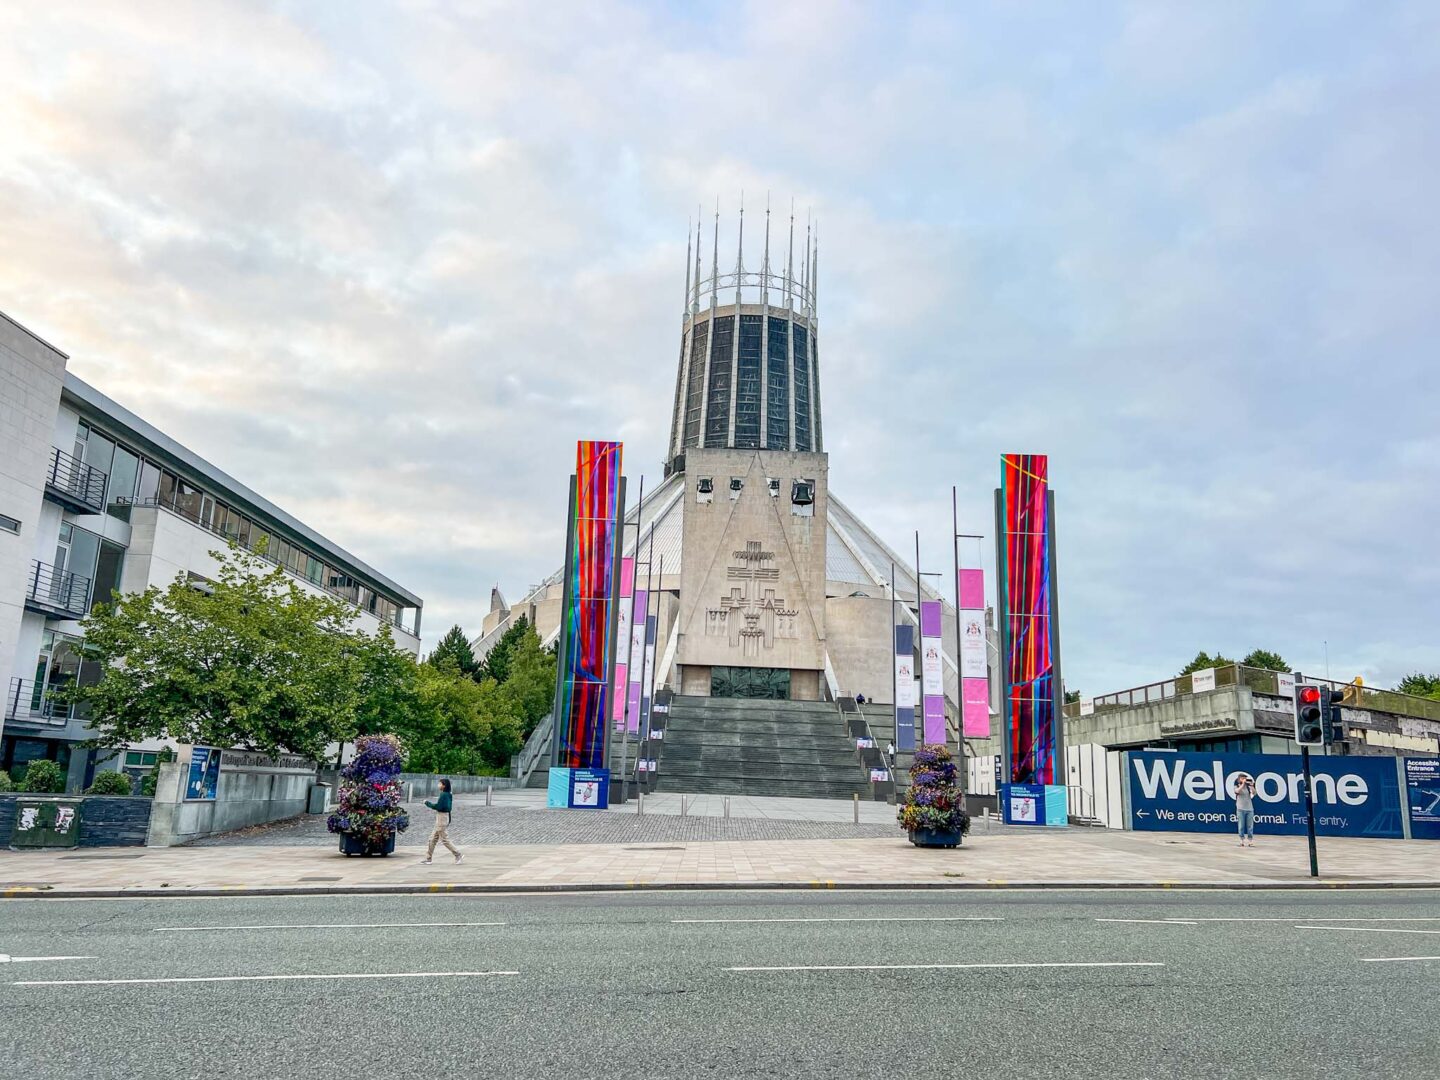 One day in Liverpool, Liverpool Metropolitan Cathedral